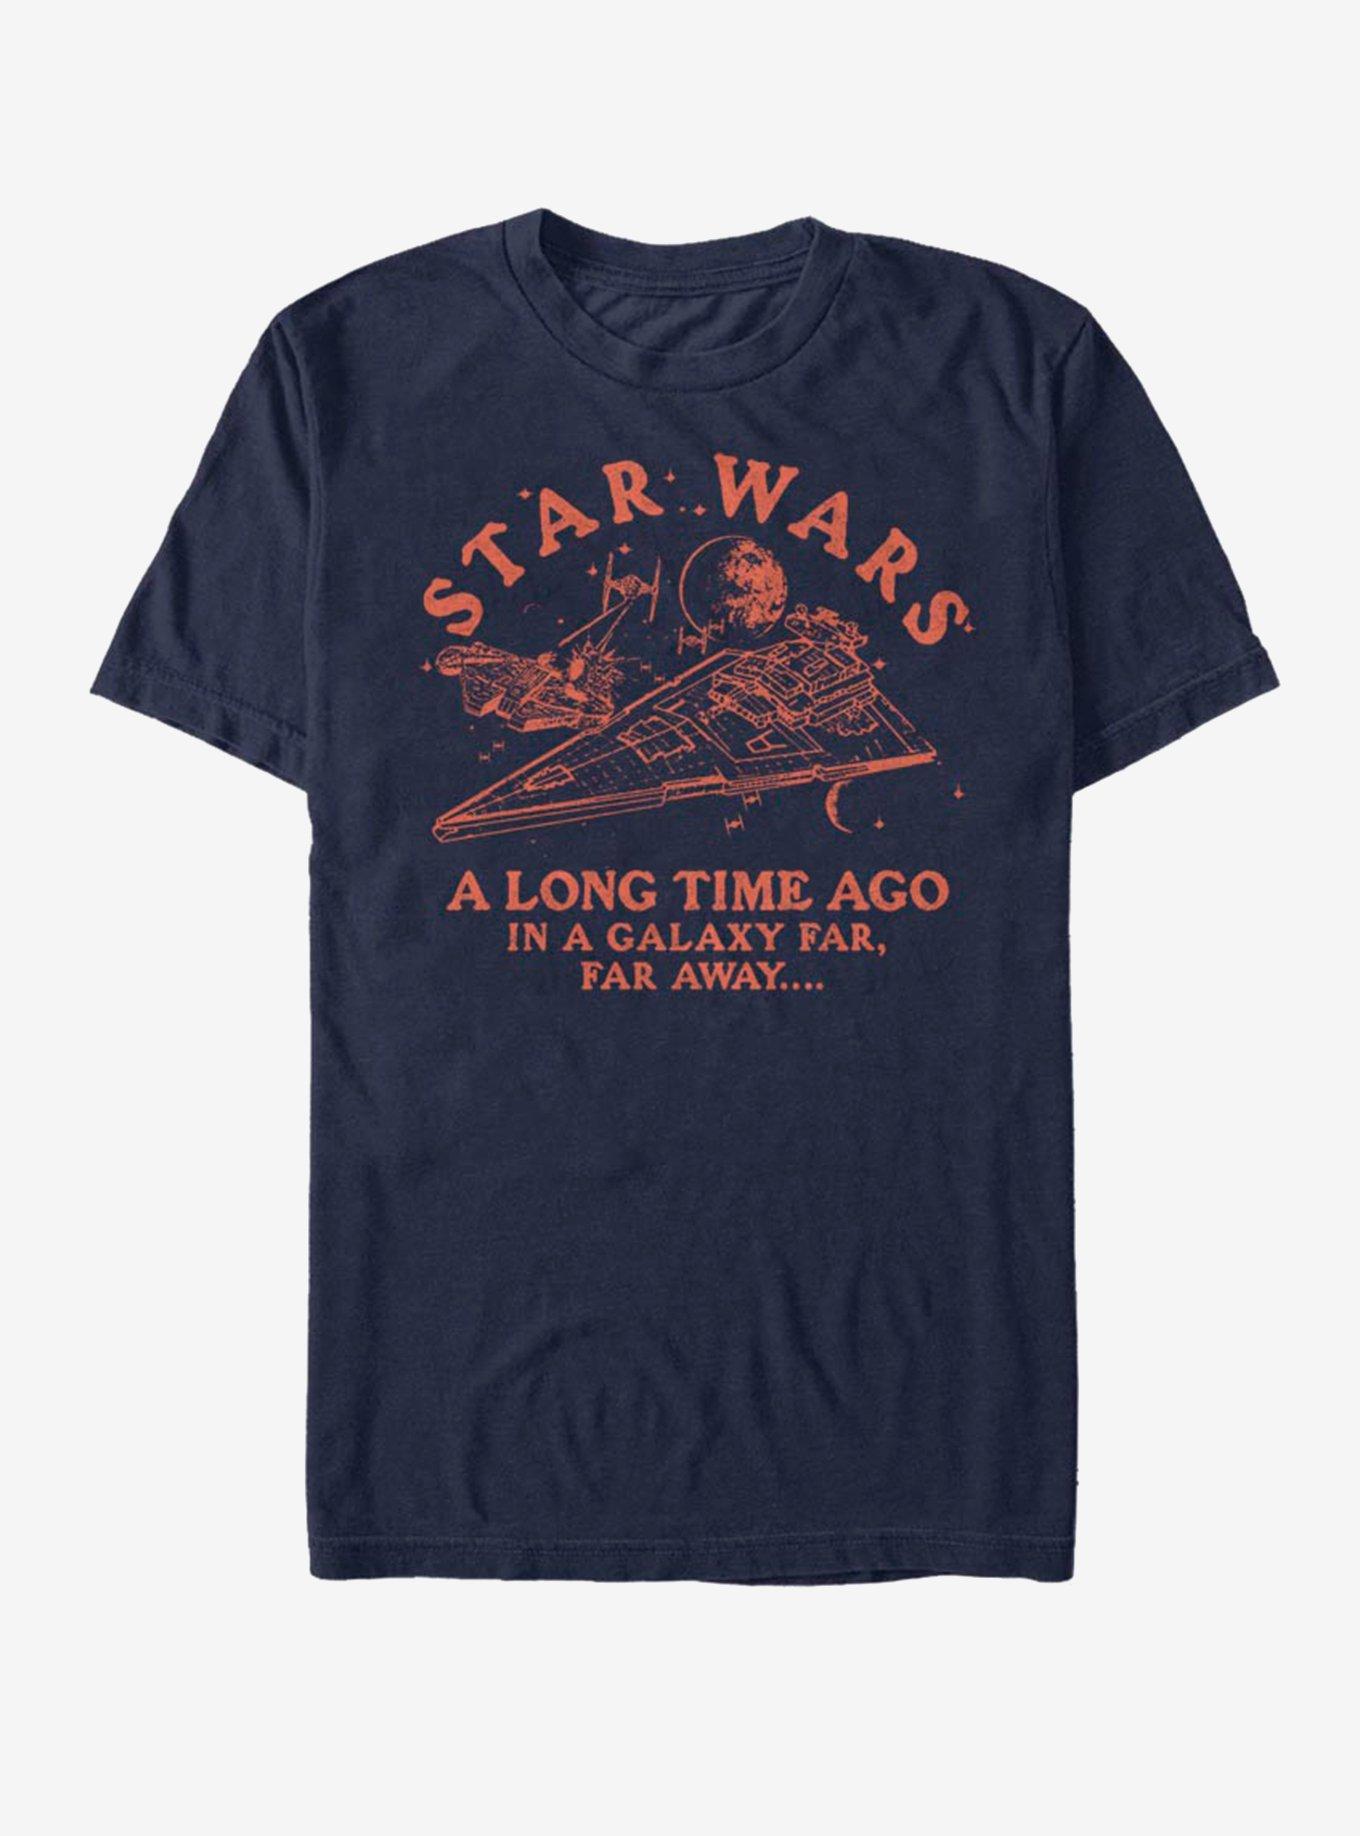 Star Wars In The Craw T-Shirt, NAVY, hi-res